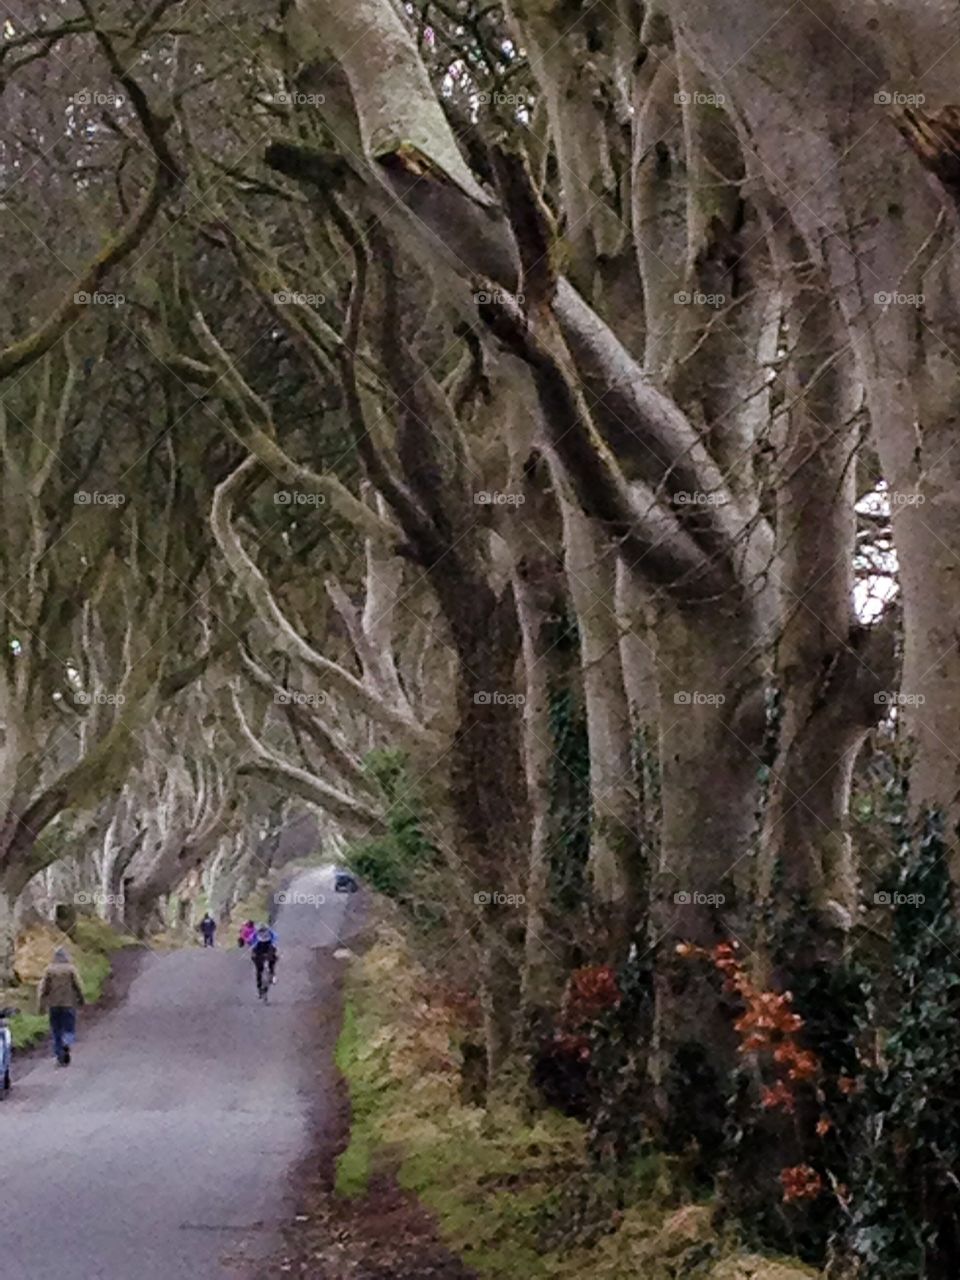 The Dark Hedges Northern Ireland ( Game of Thrones fame)